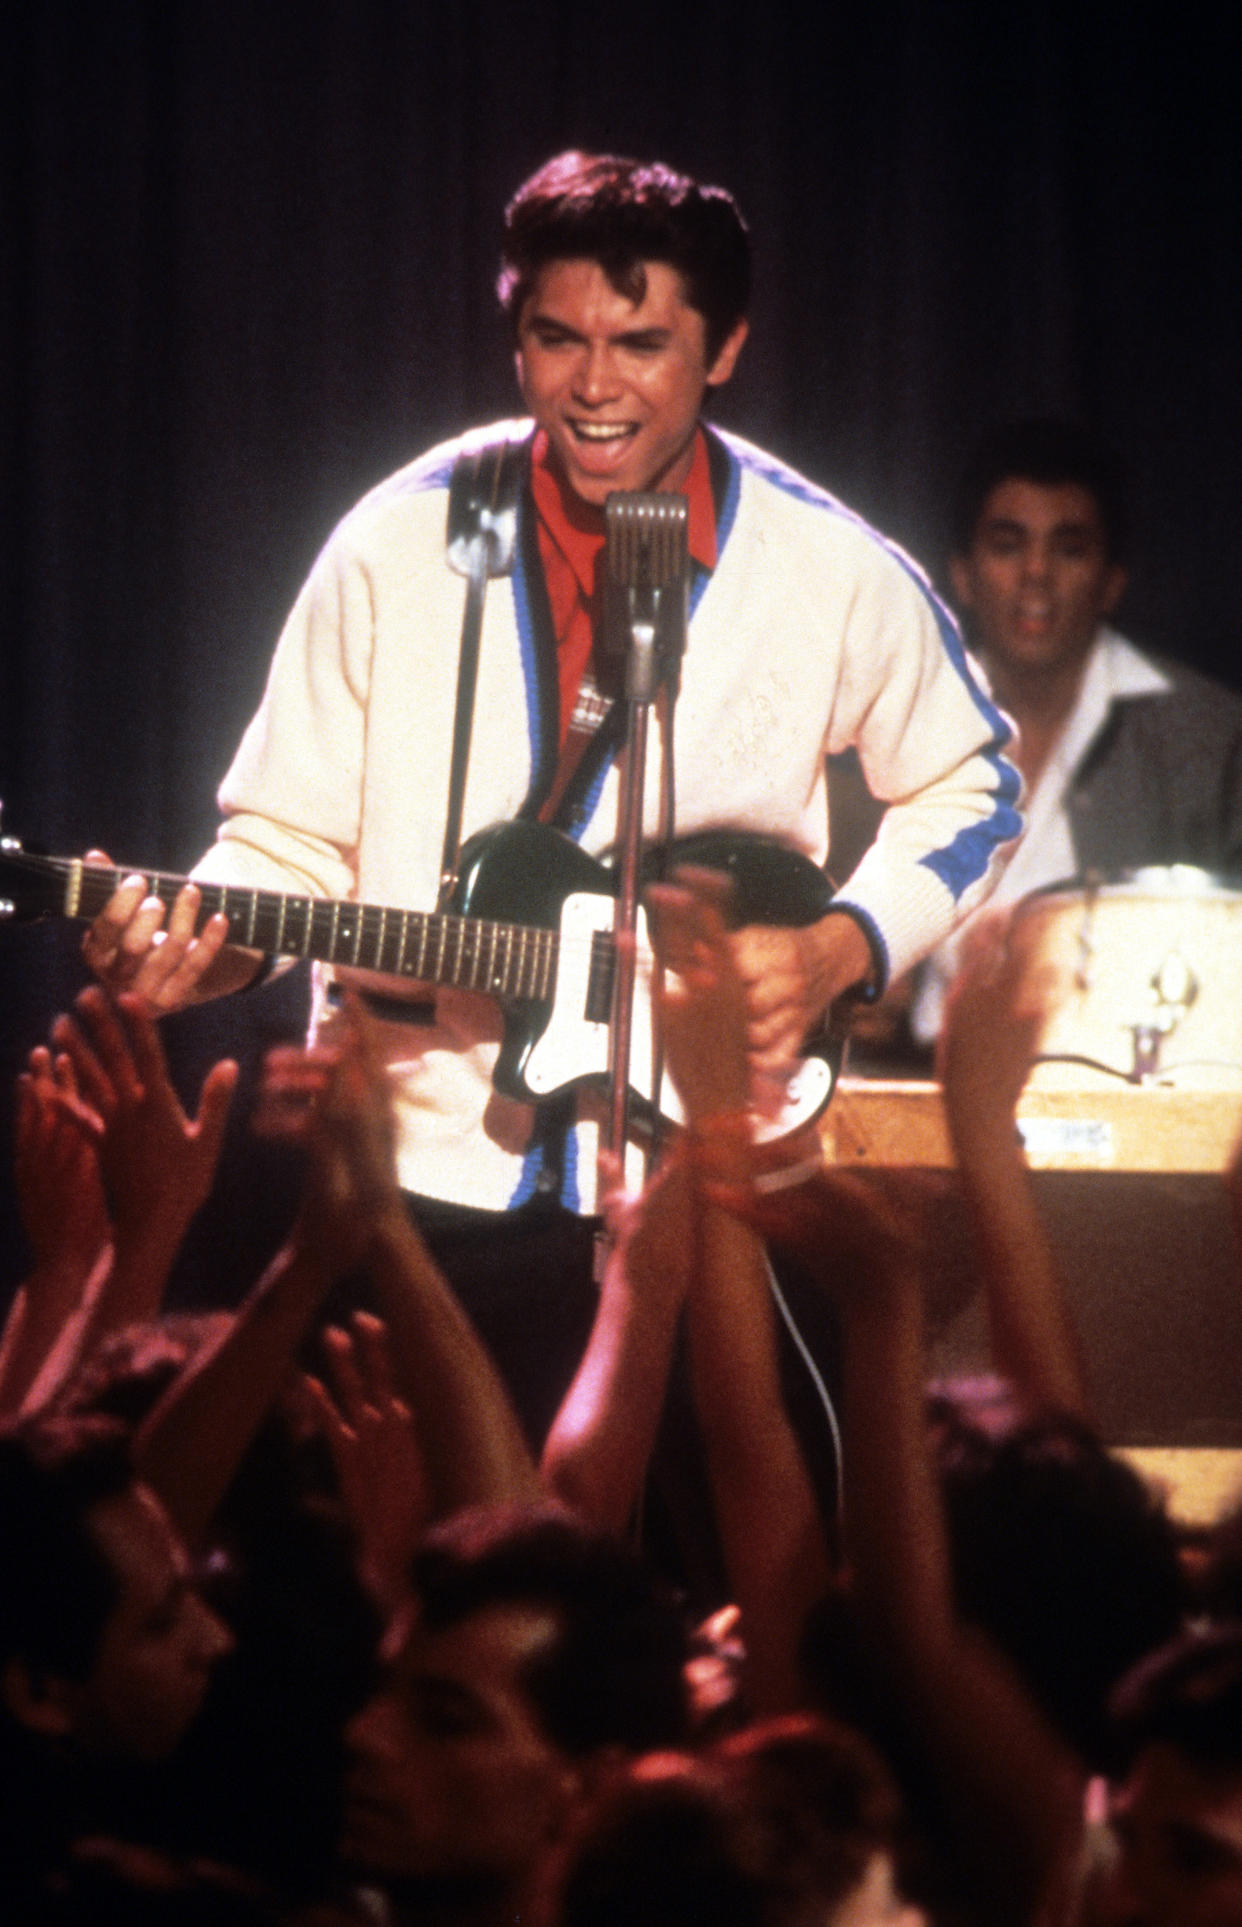 Lou Diamond Phillips performs in a scene from the film 'La Bamba', 1987. (Photo by Columbia Pictures/Getty Images)